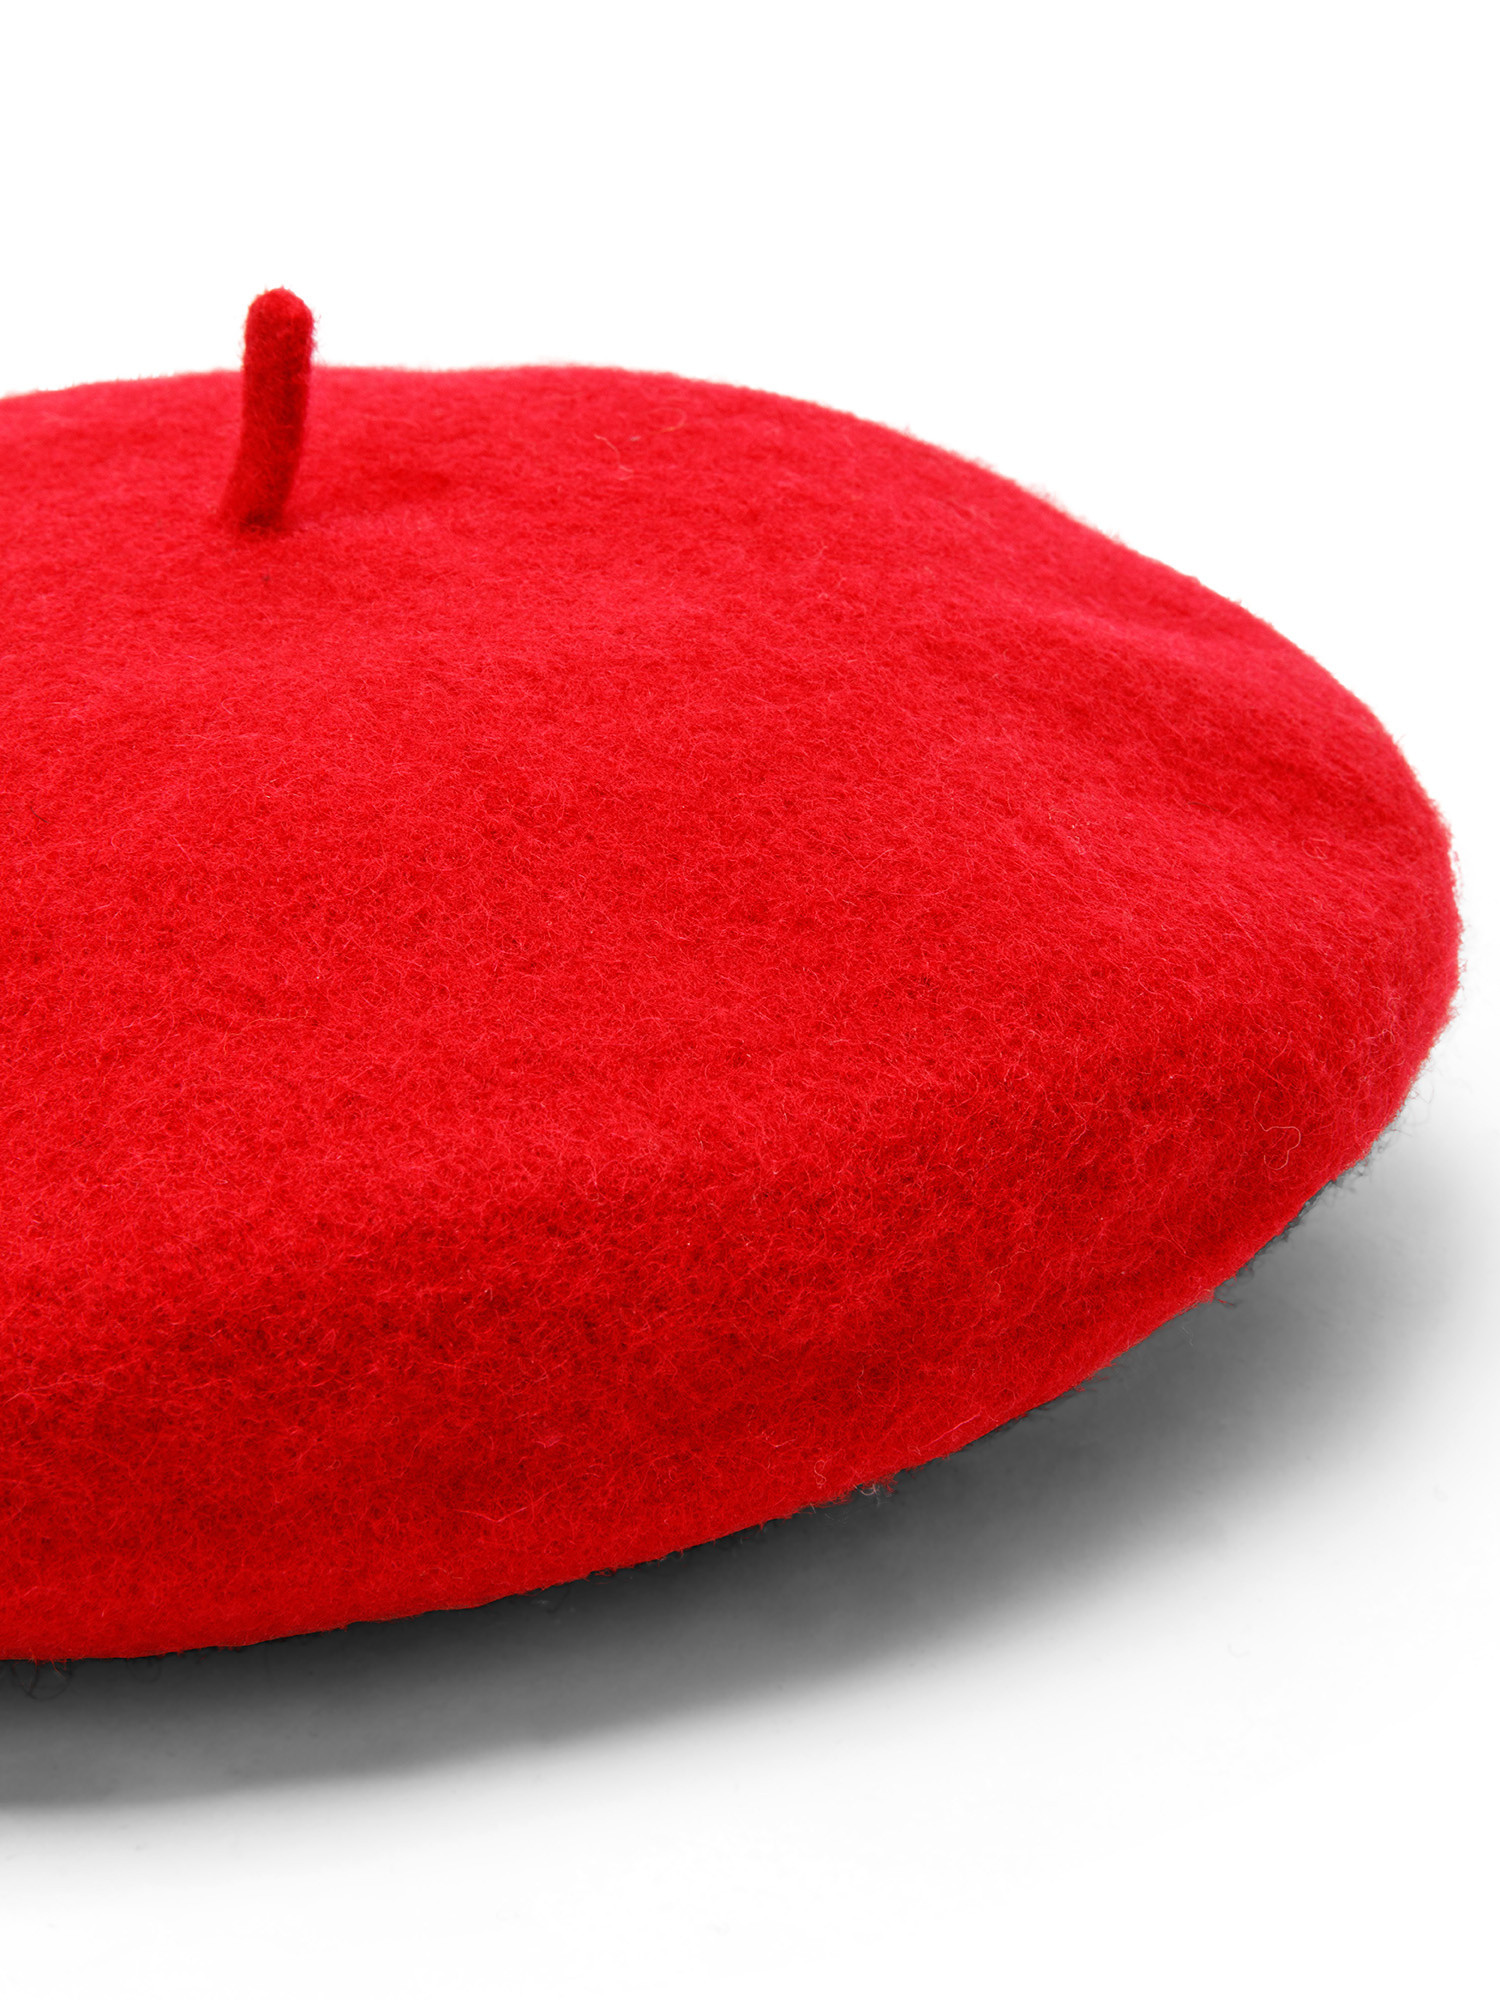 Koan - Pure wool beret, Red, large image number 1